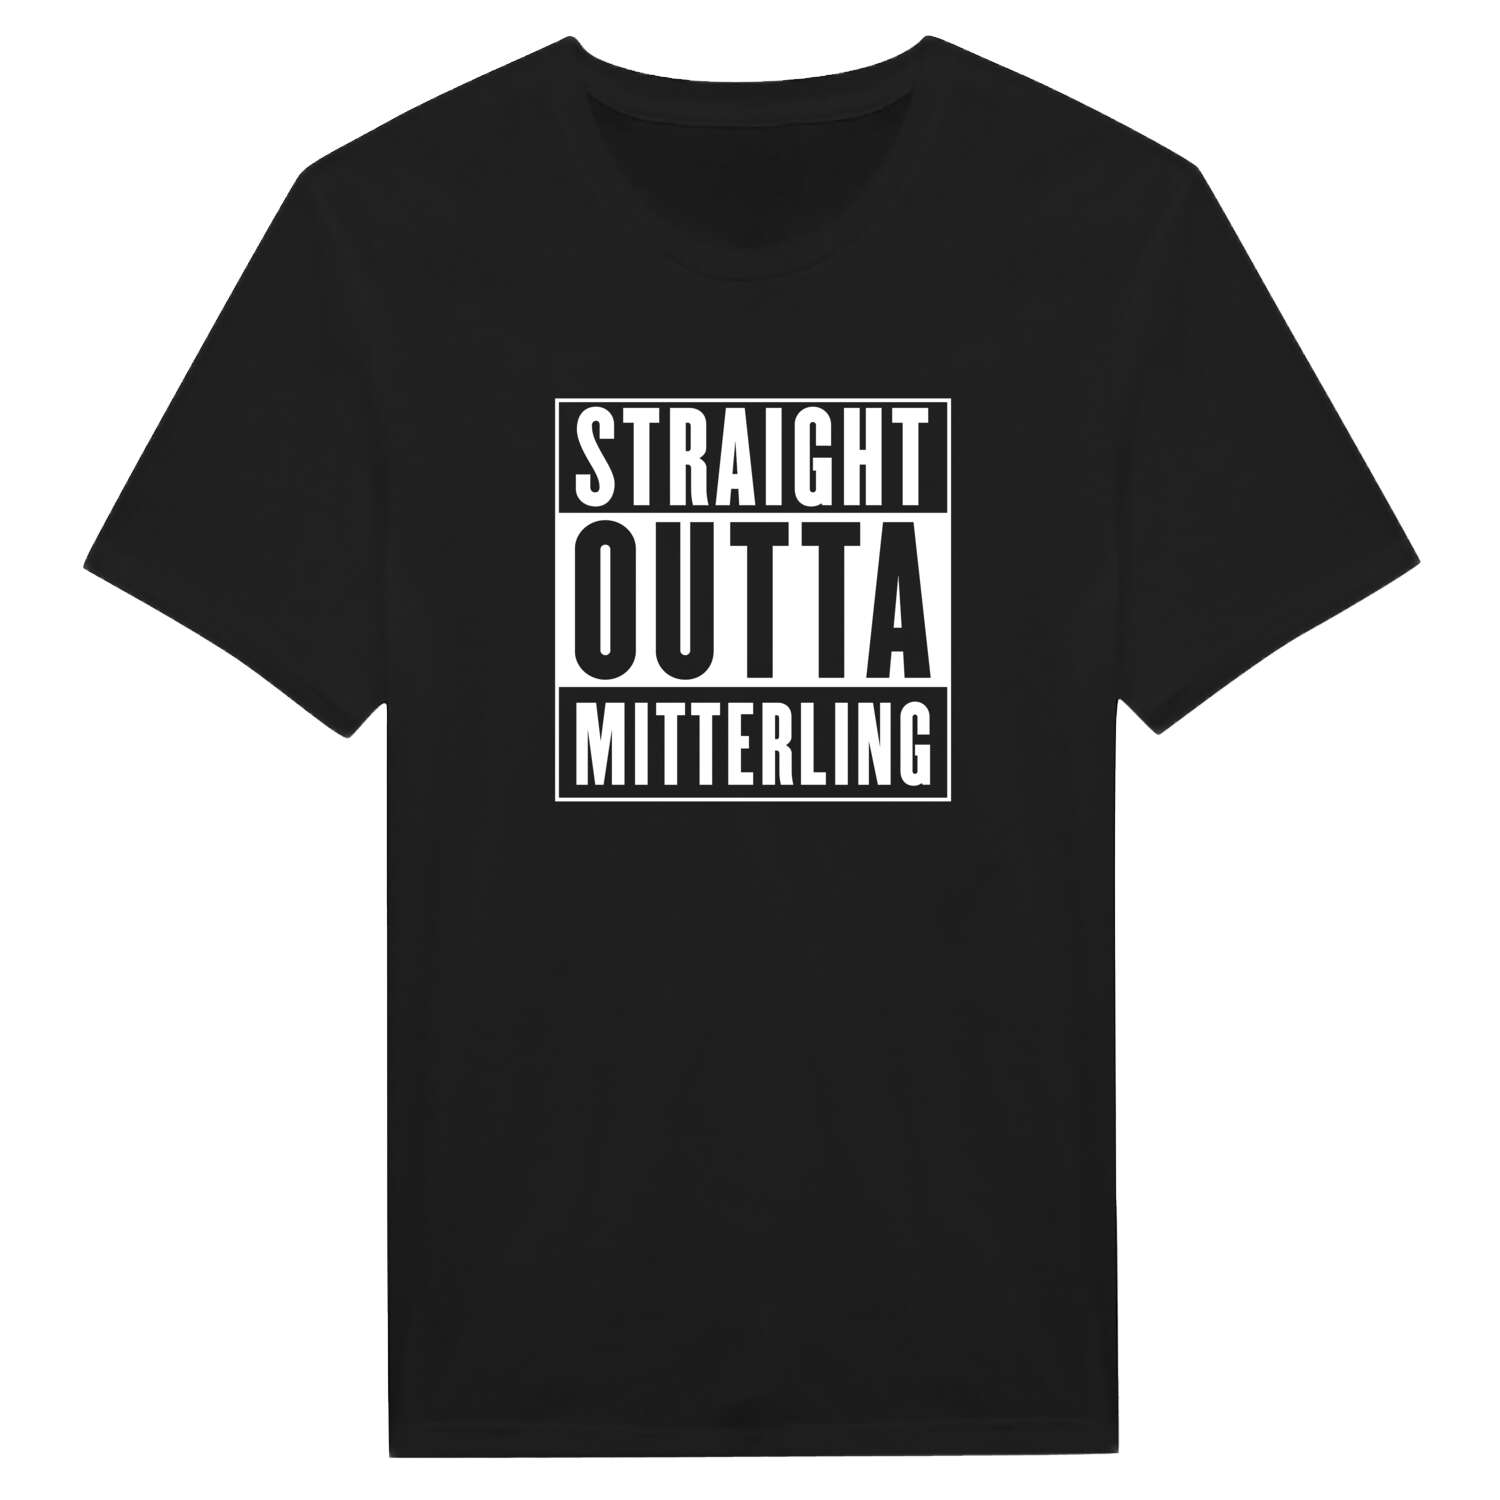 Mitterling T-Shirt »Straight Outta«